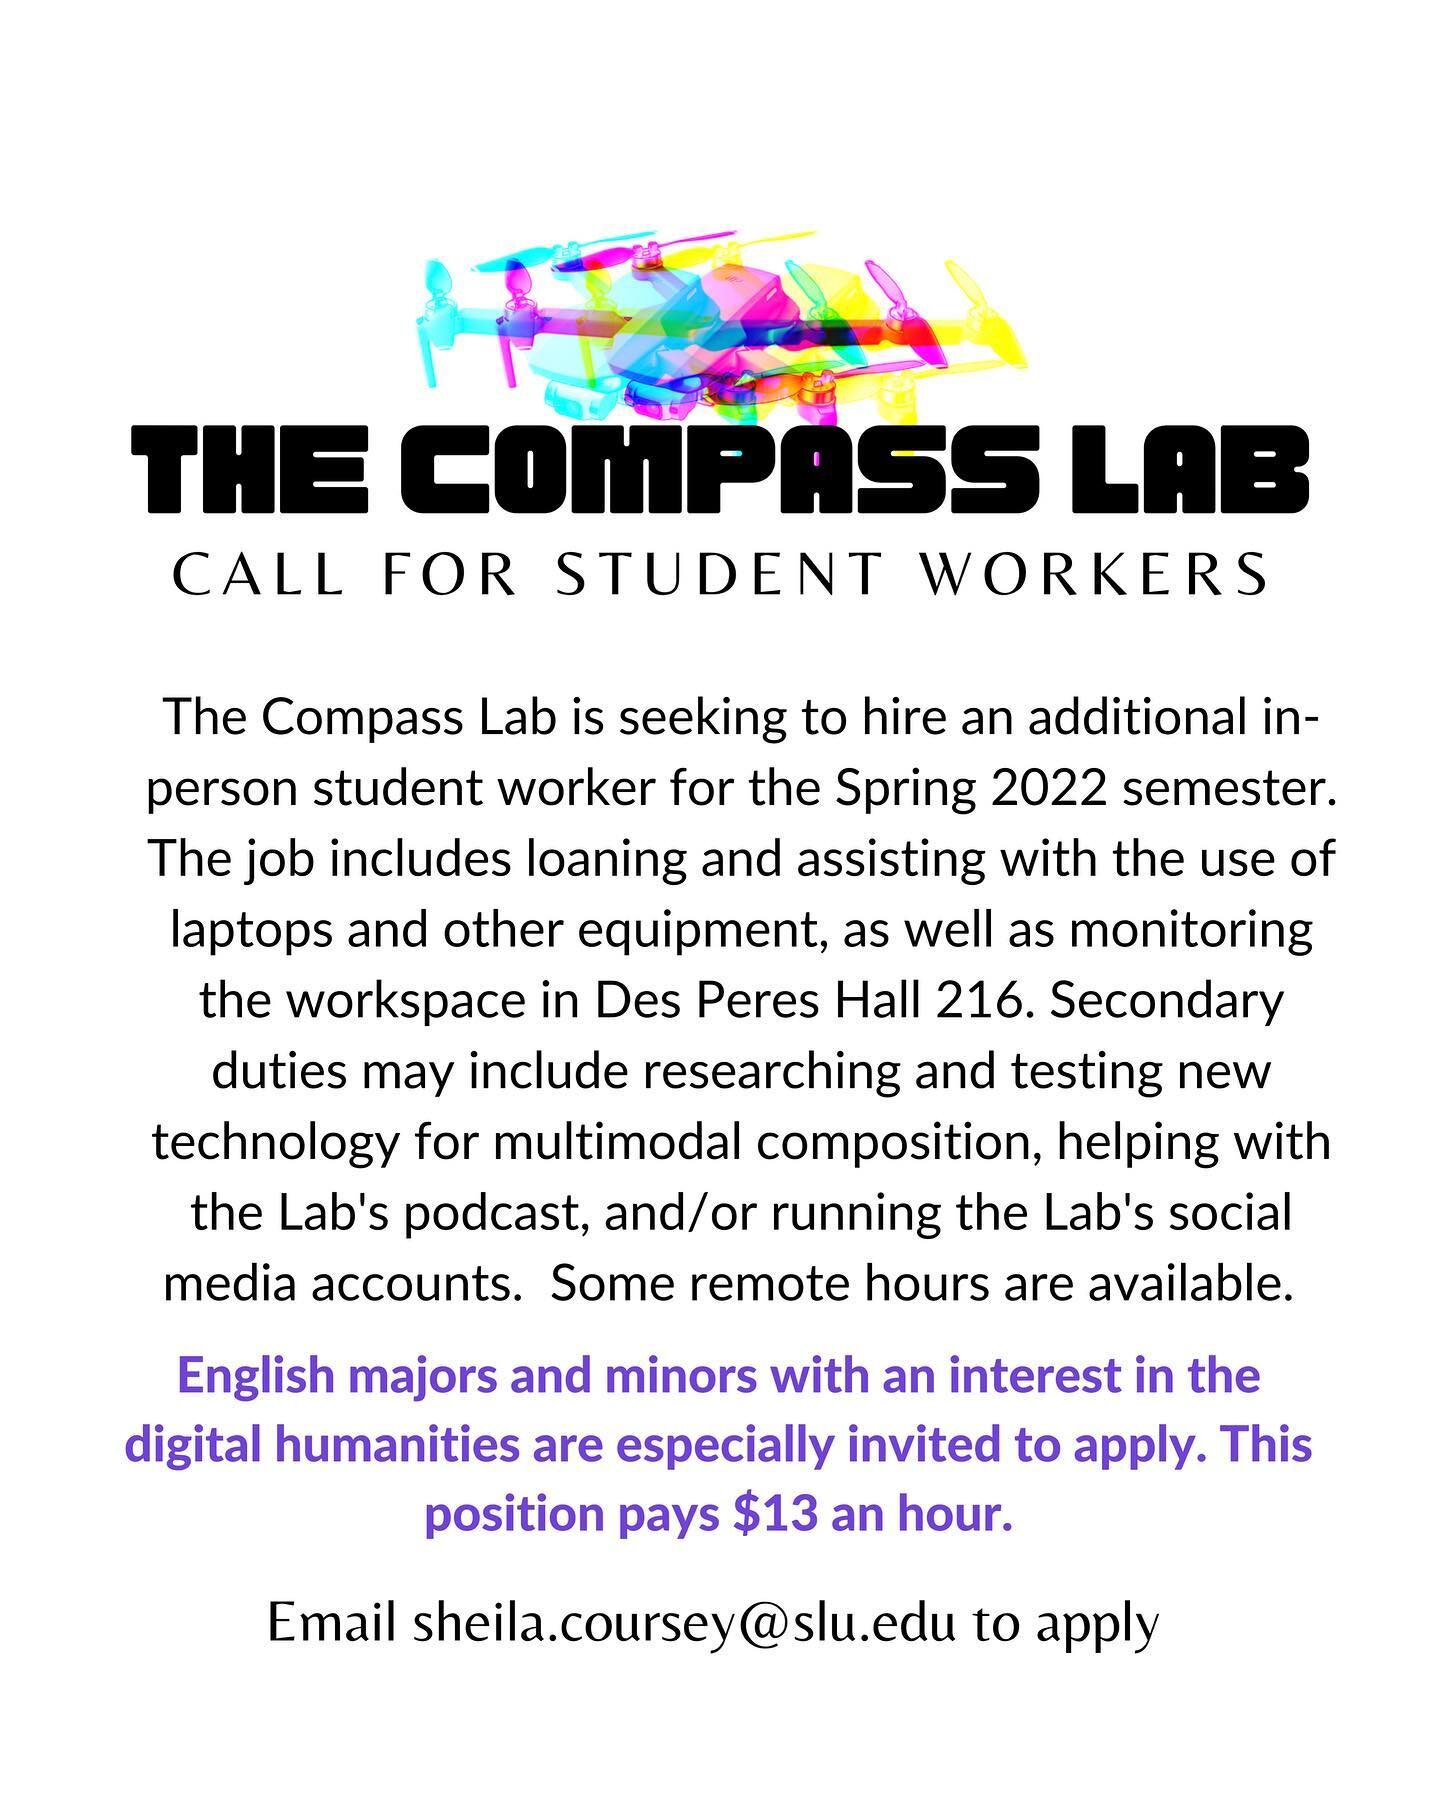 Come work for us!